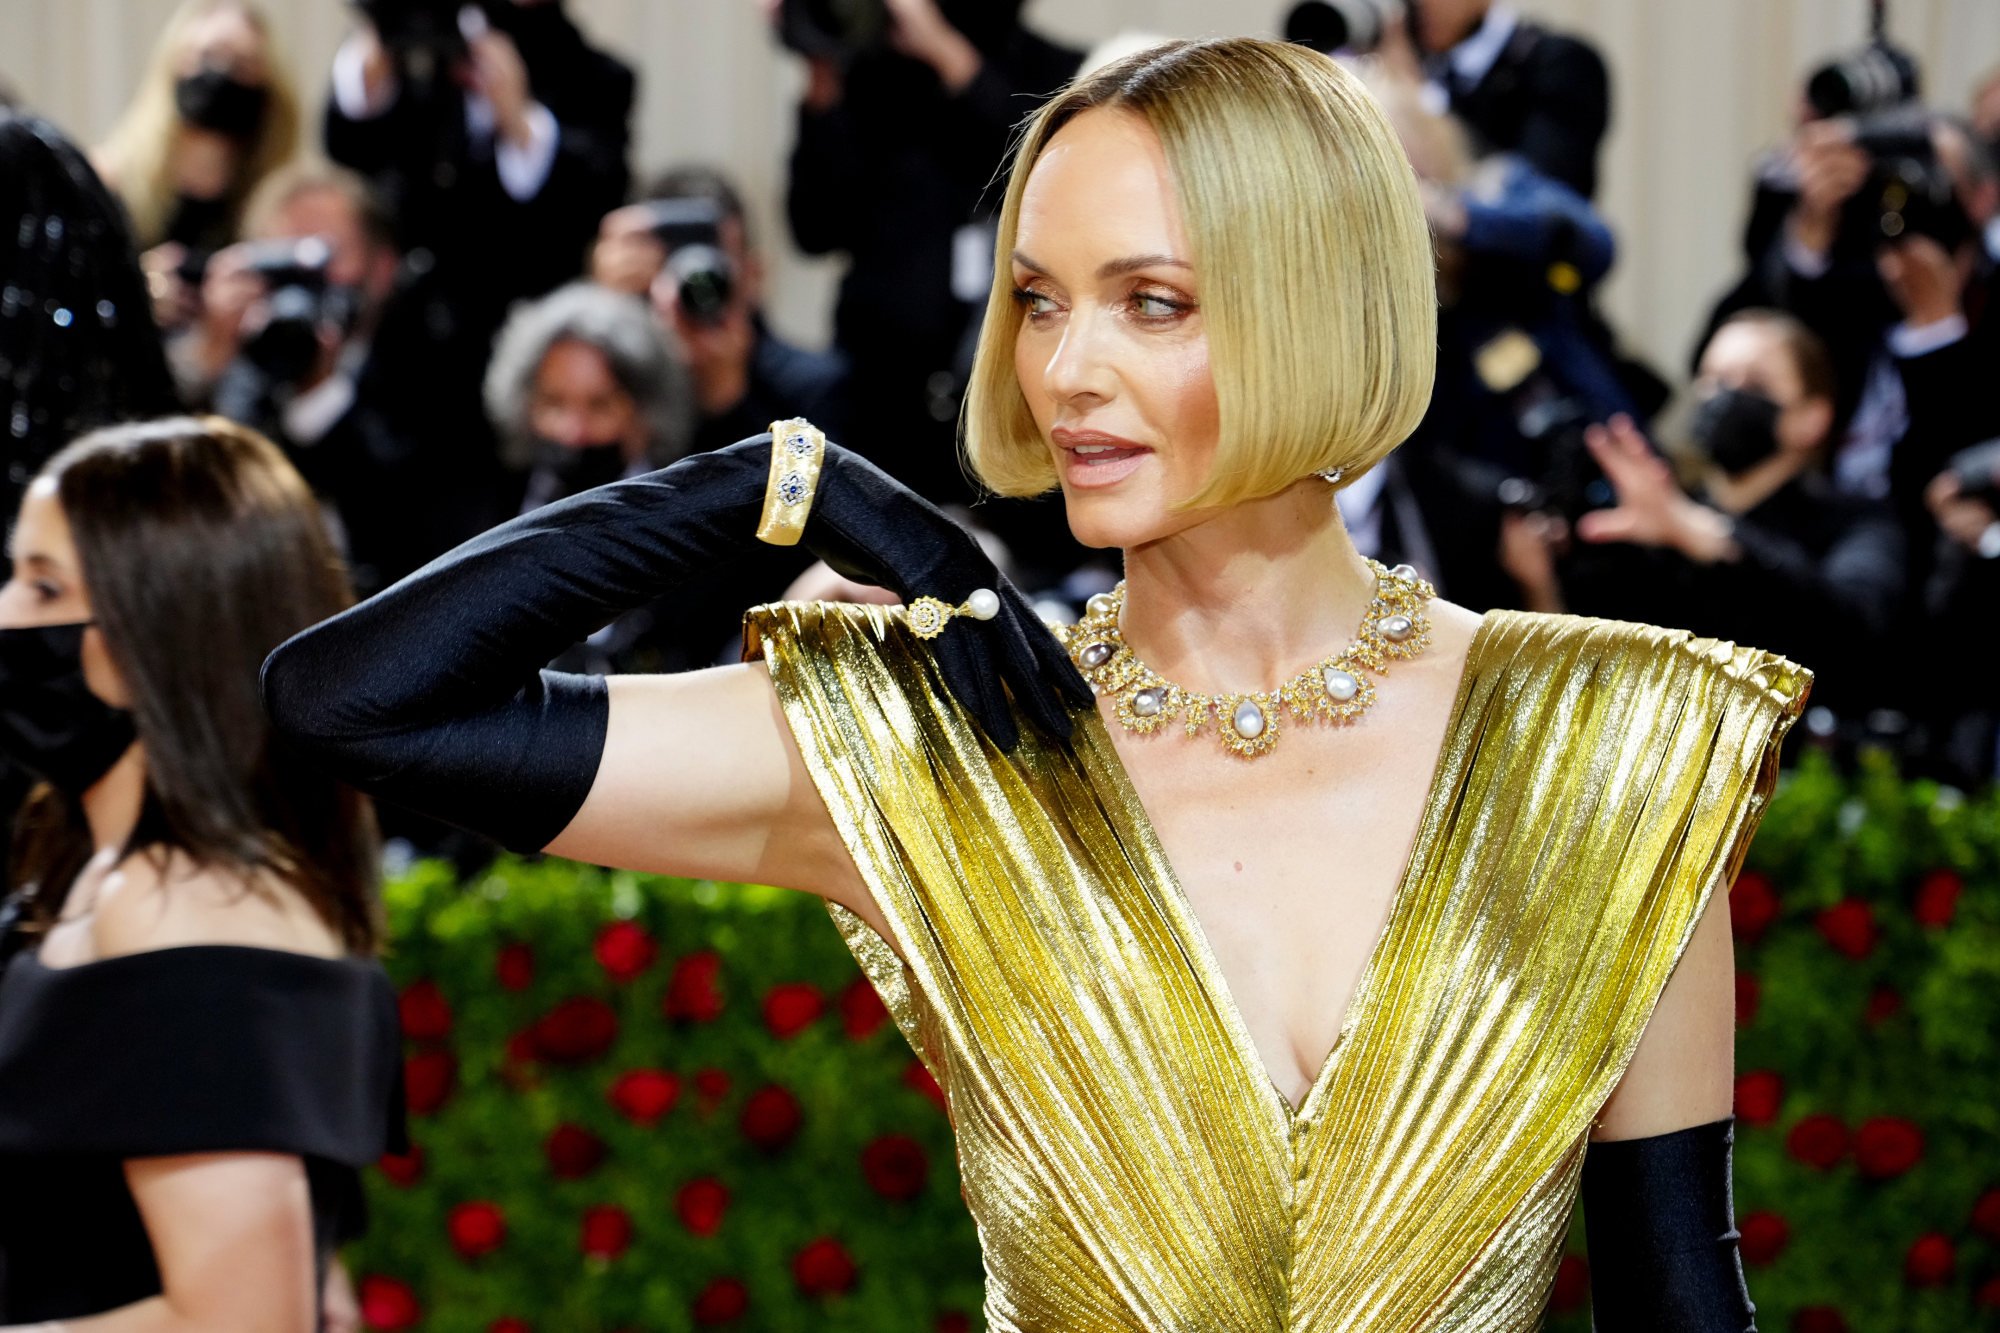 Model Amber Valletta dripped in gold on the Met Gala red carpet 2022, on May 2, in New York. Photo: FilmMagic